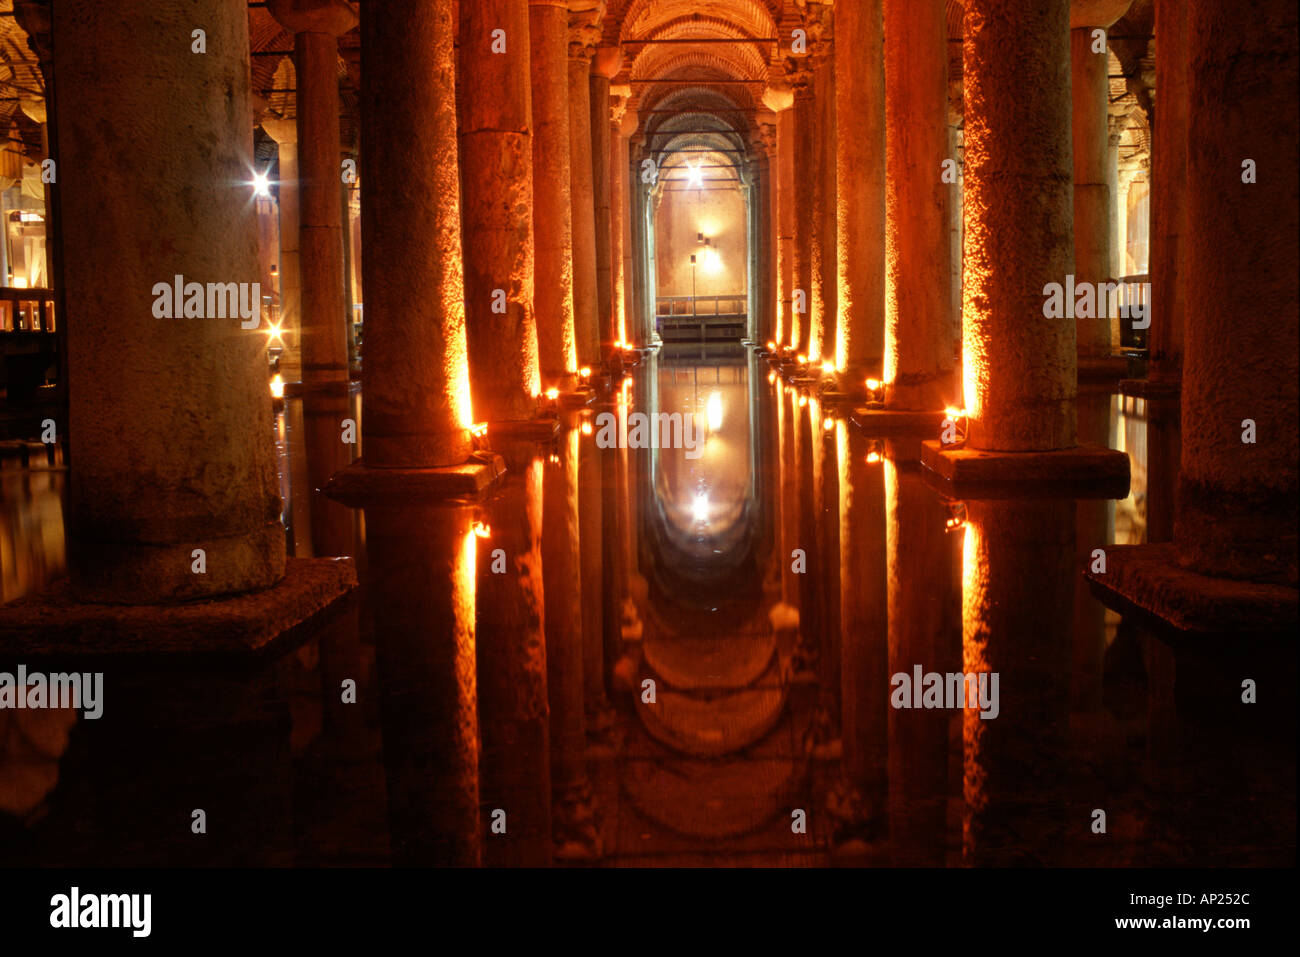 The underground Yerebatan Basilica Cistern built in the 6th century during the reign of Byzantine Emperor Justinian in Istanbul Turkey Stock Photo